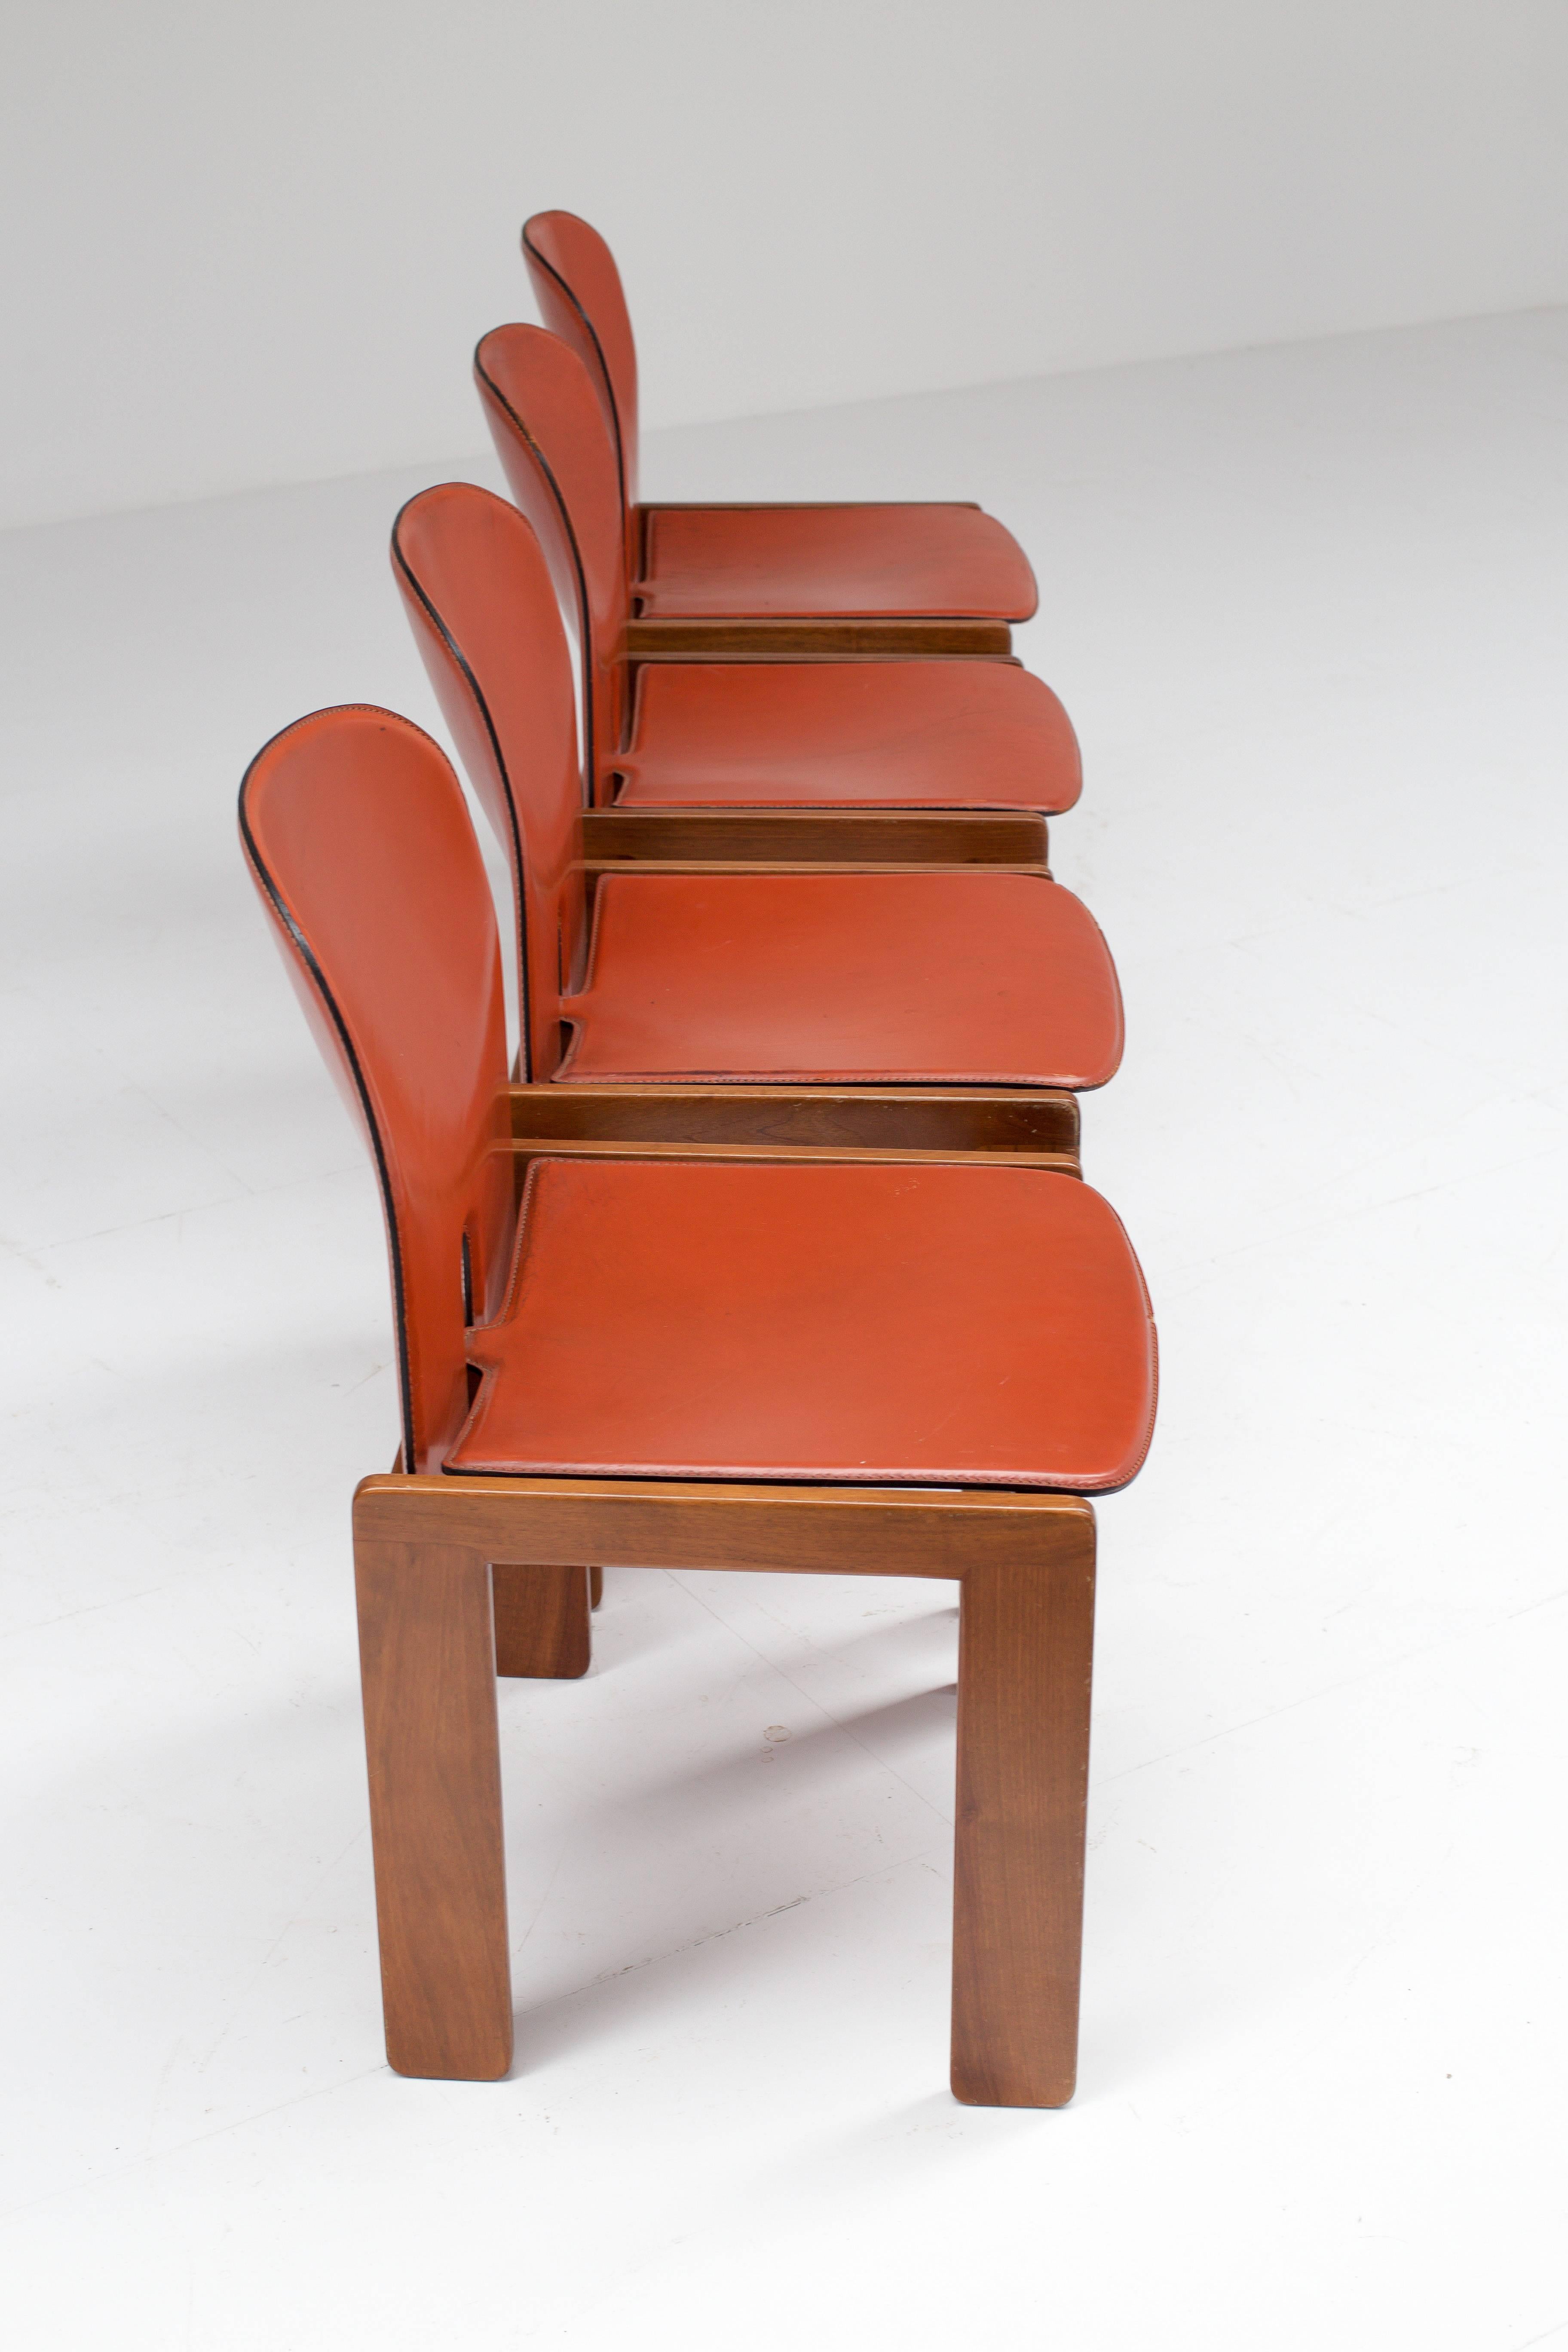 Set of four chairs model 121 with makers mark, designed in 1965. There is a very nice subtle patina to the leather which remains in an almost perfect condition. The wood frame is also in very good condition.